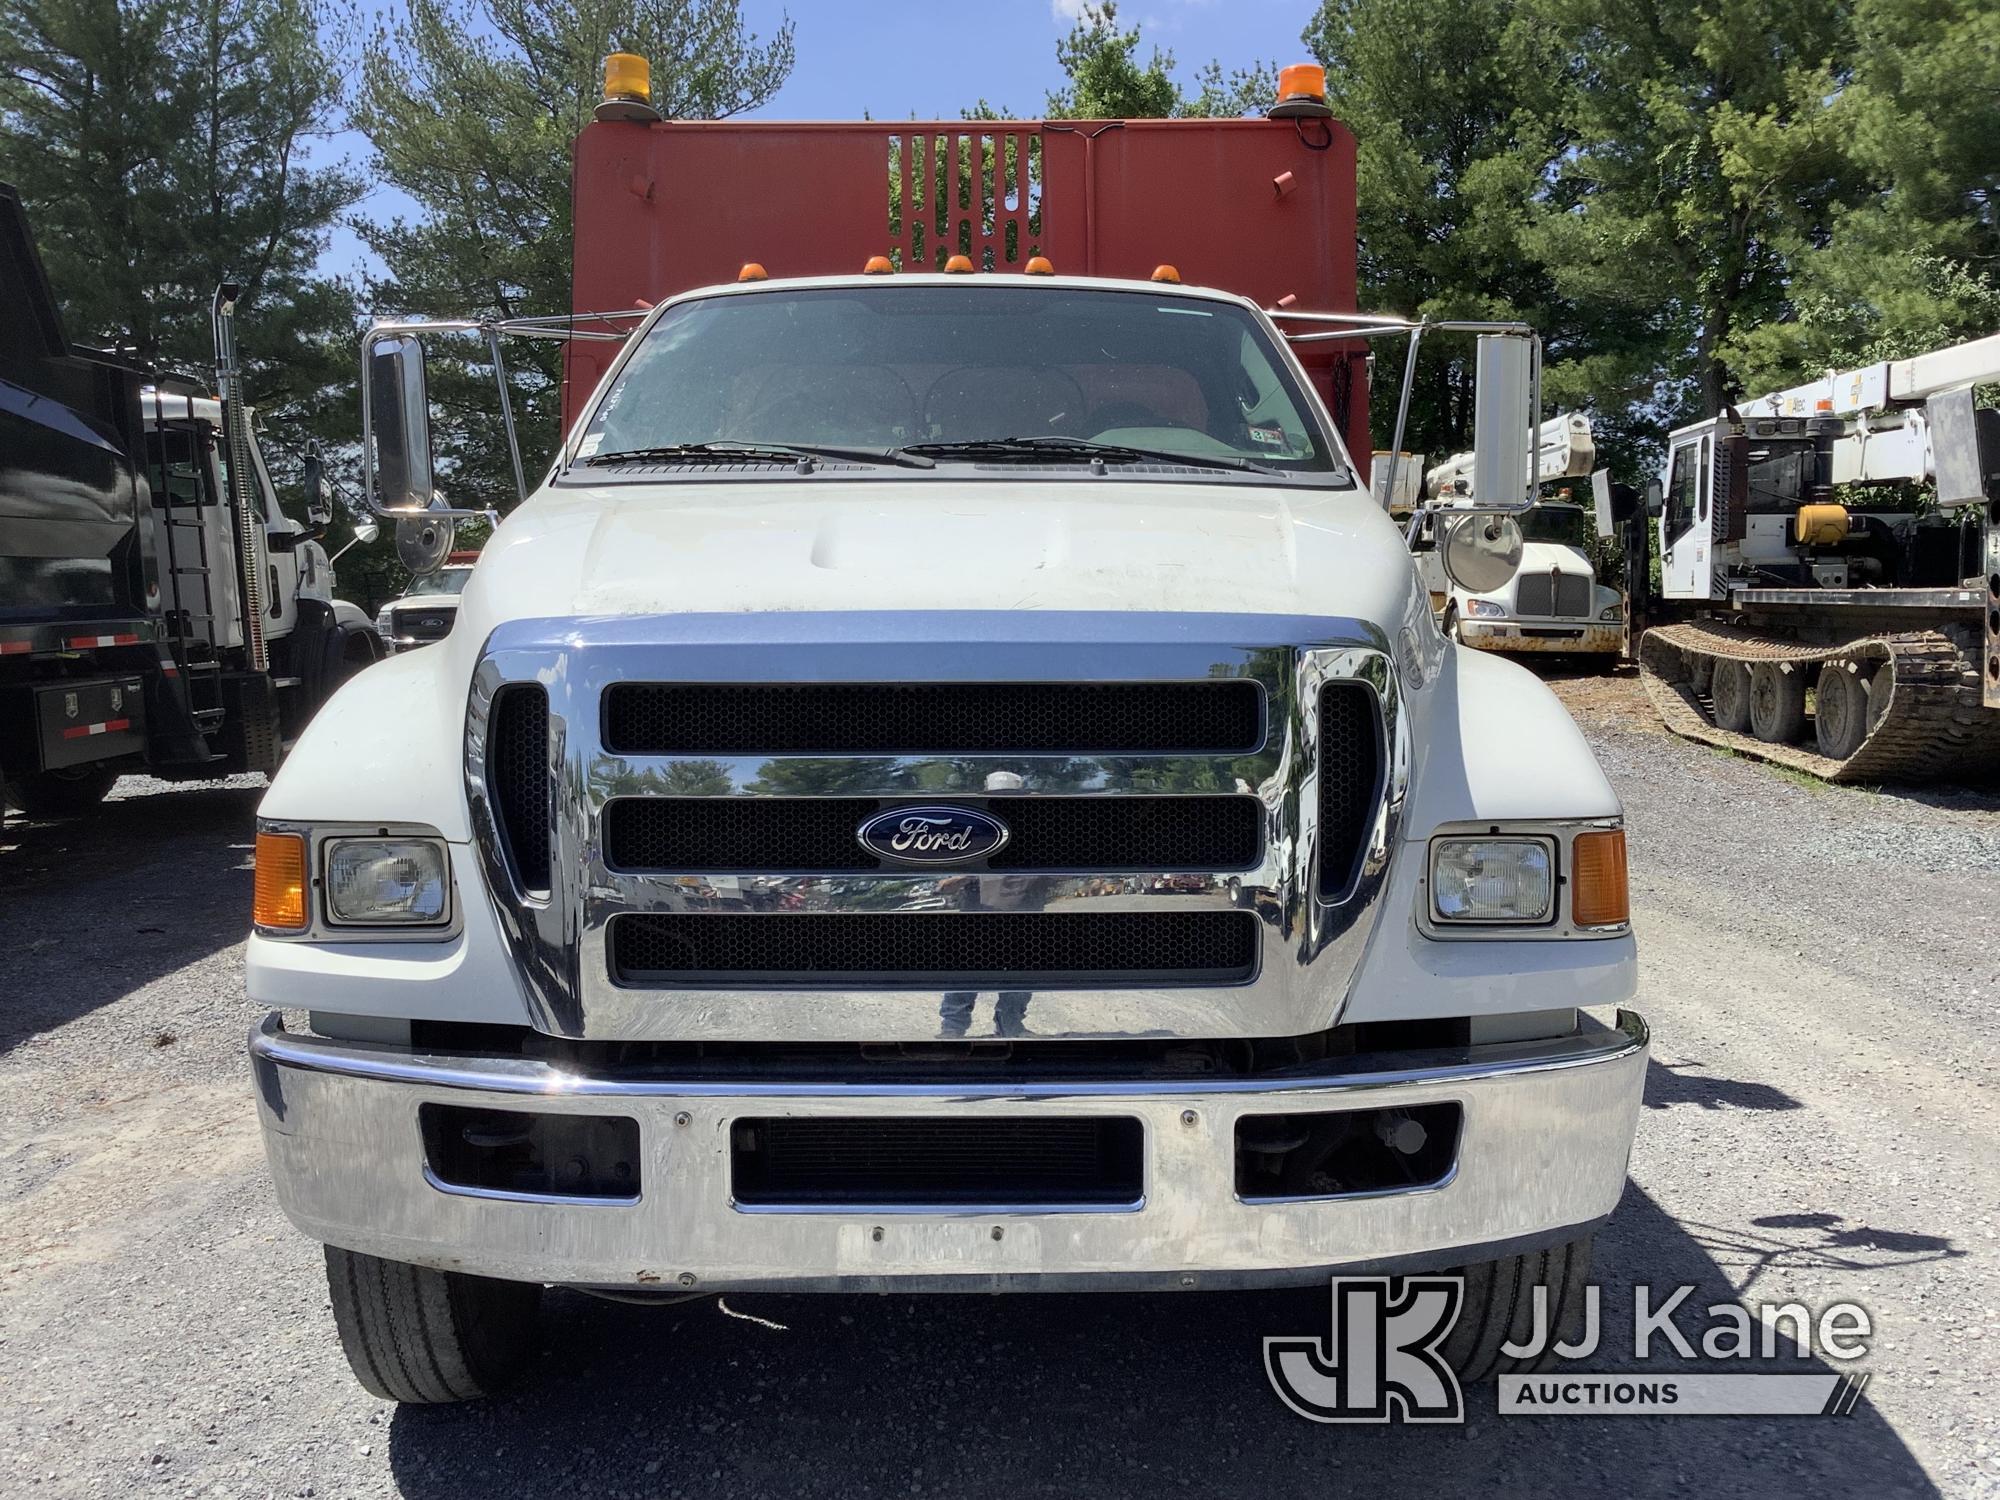 (Frederick, MD) 2012 Ford F750 Dump Truck Runs, Moves & Operates, Check Engine Light On, Reduced Pow